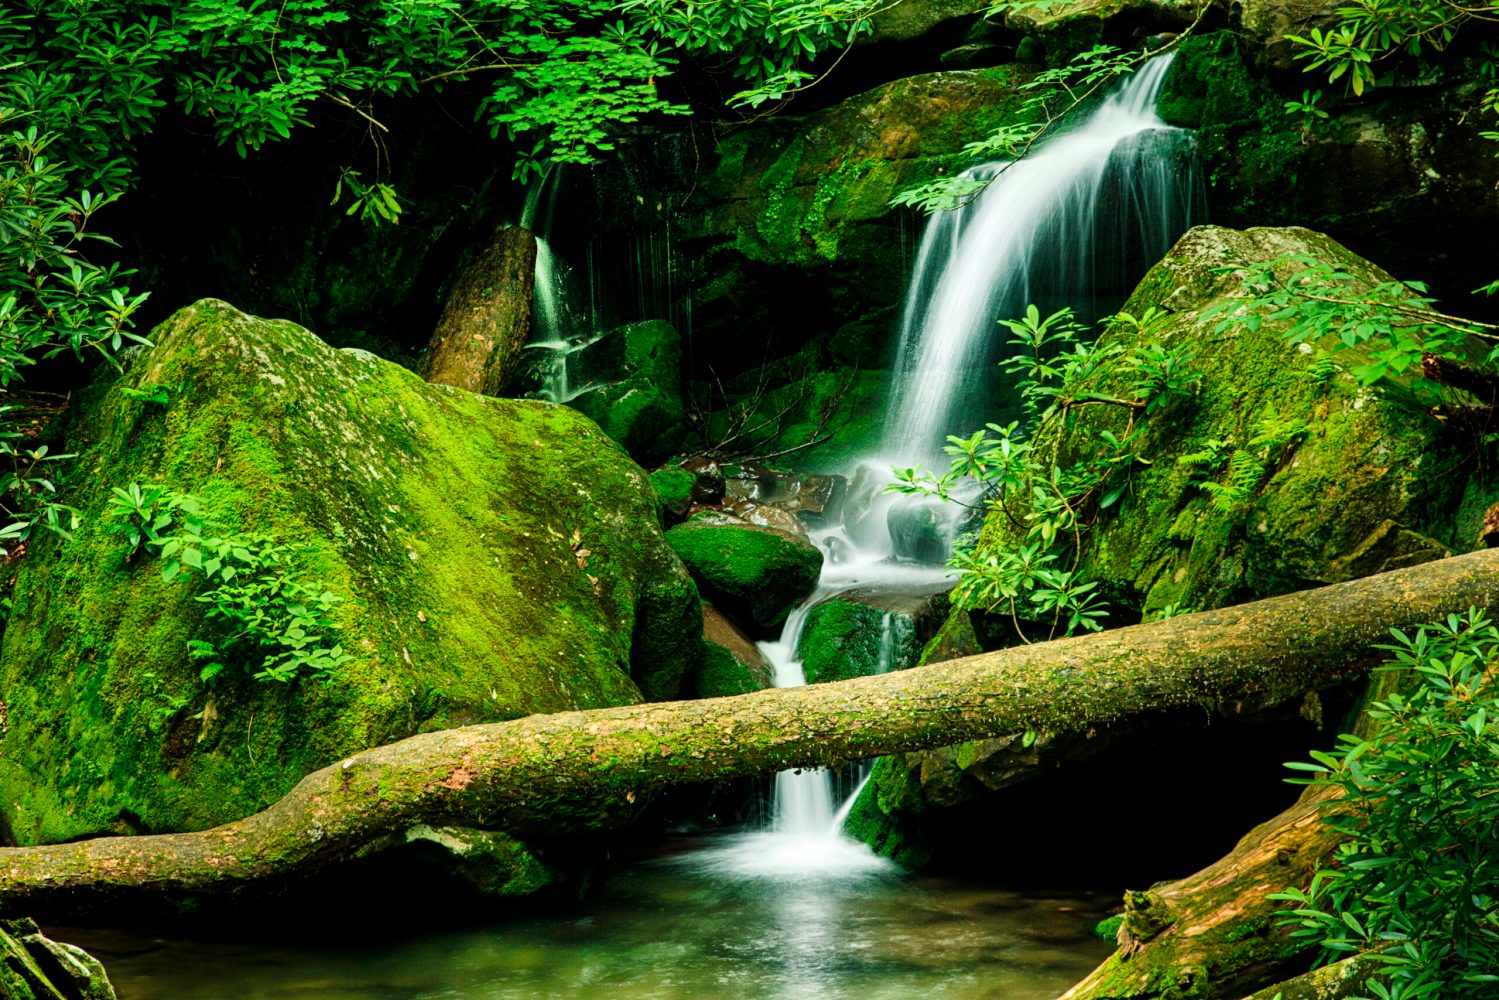 Grotto Falls in the Great Smoky Mountain National Park